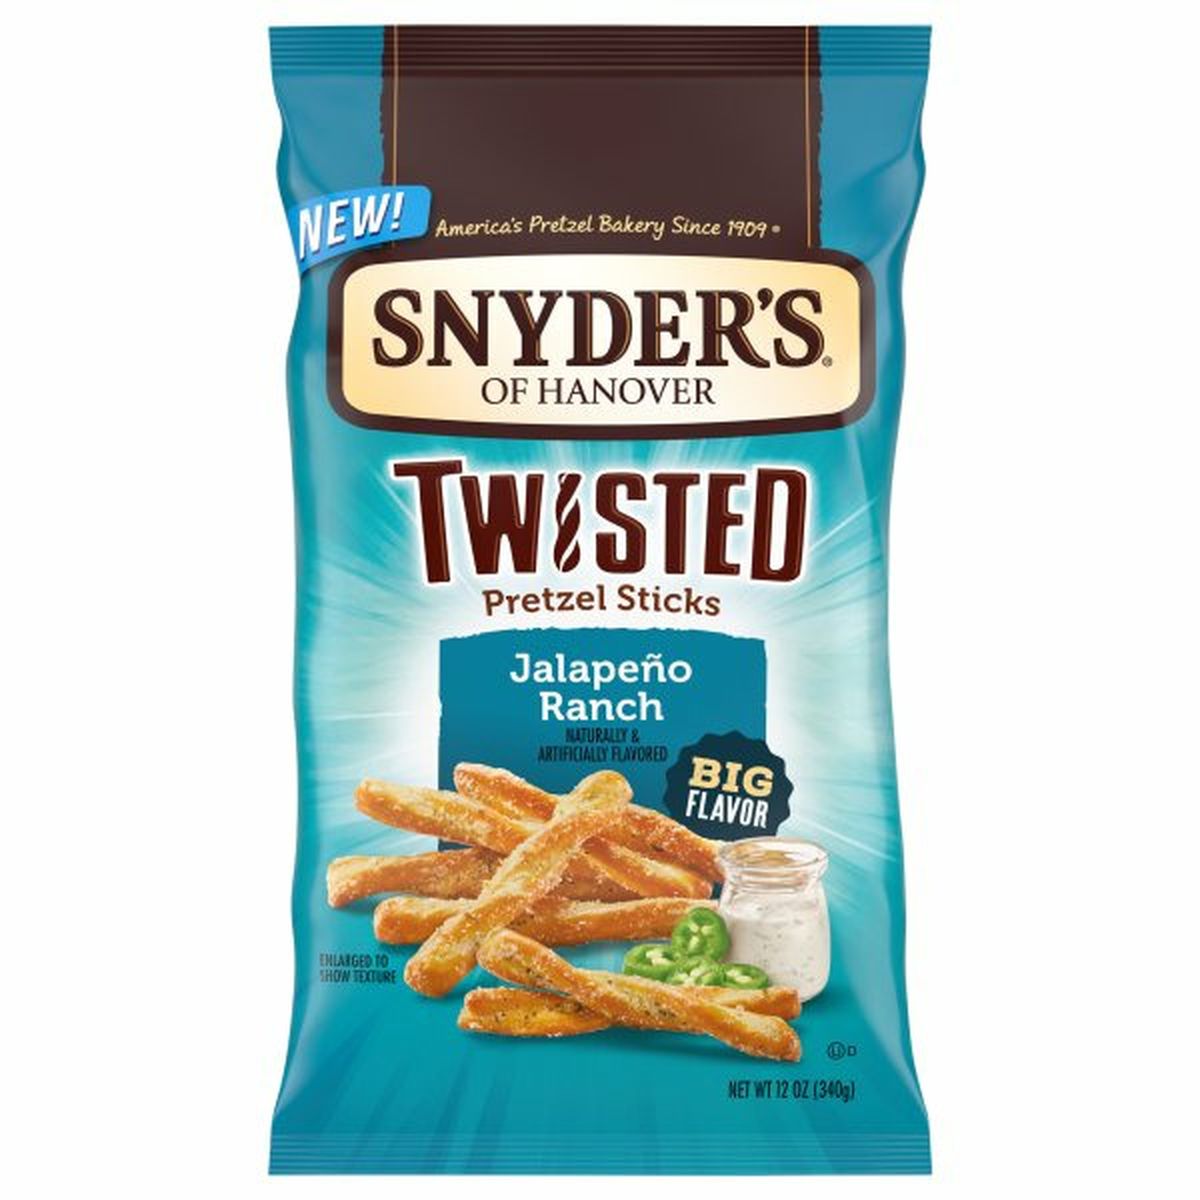 Calories in Snyder's of Hanovers Twisted Pretzel Sticks, Jalapeno Ranch Flavored, Twisted